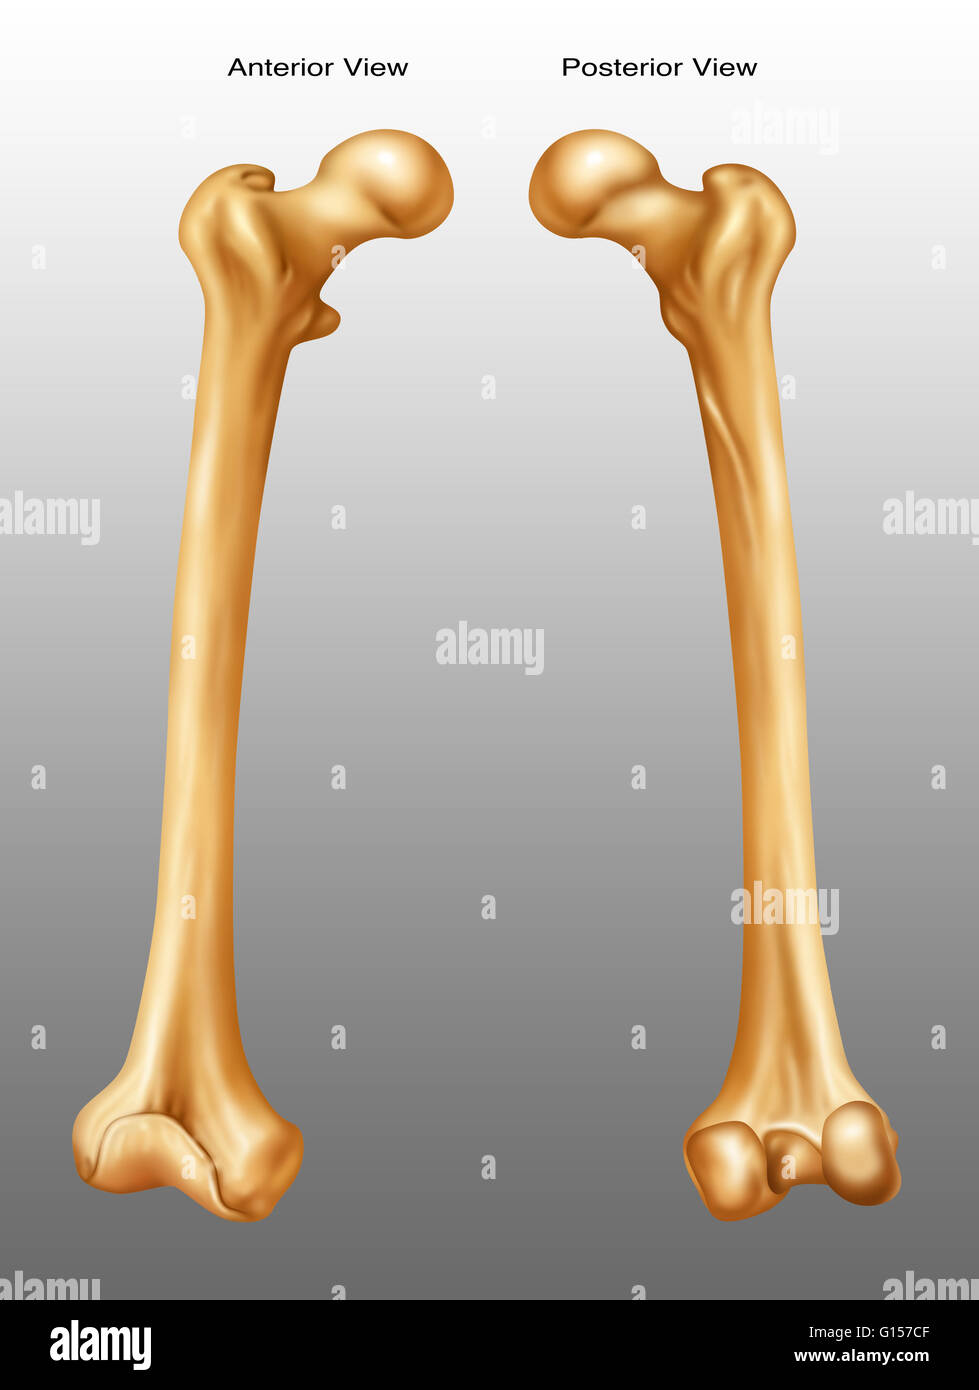 Anterior and posterior view of a femur. Stock Photo